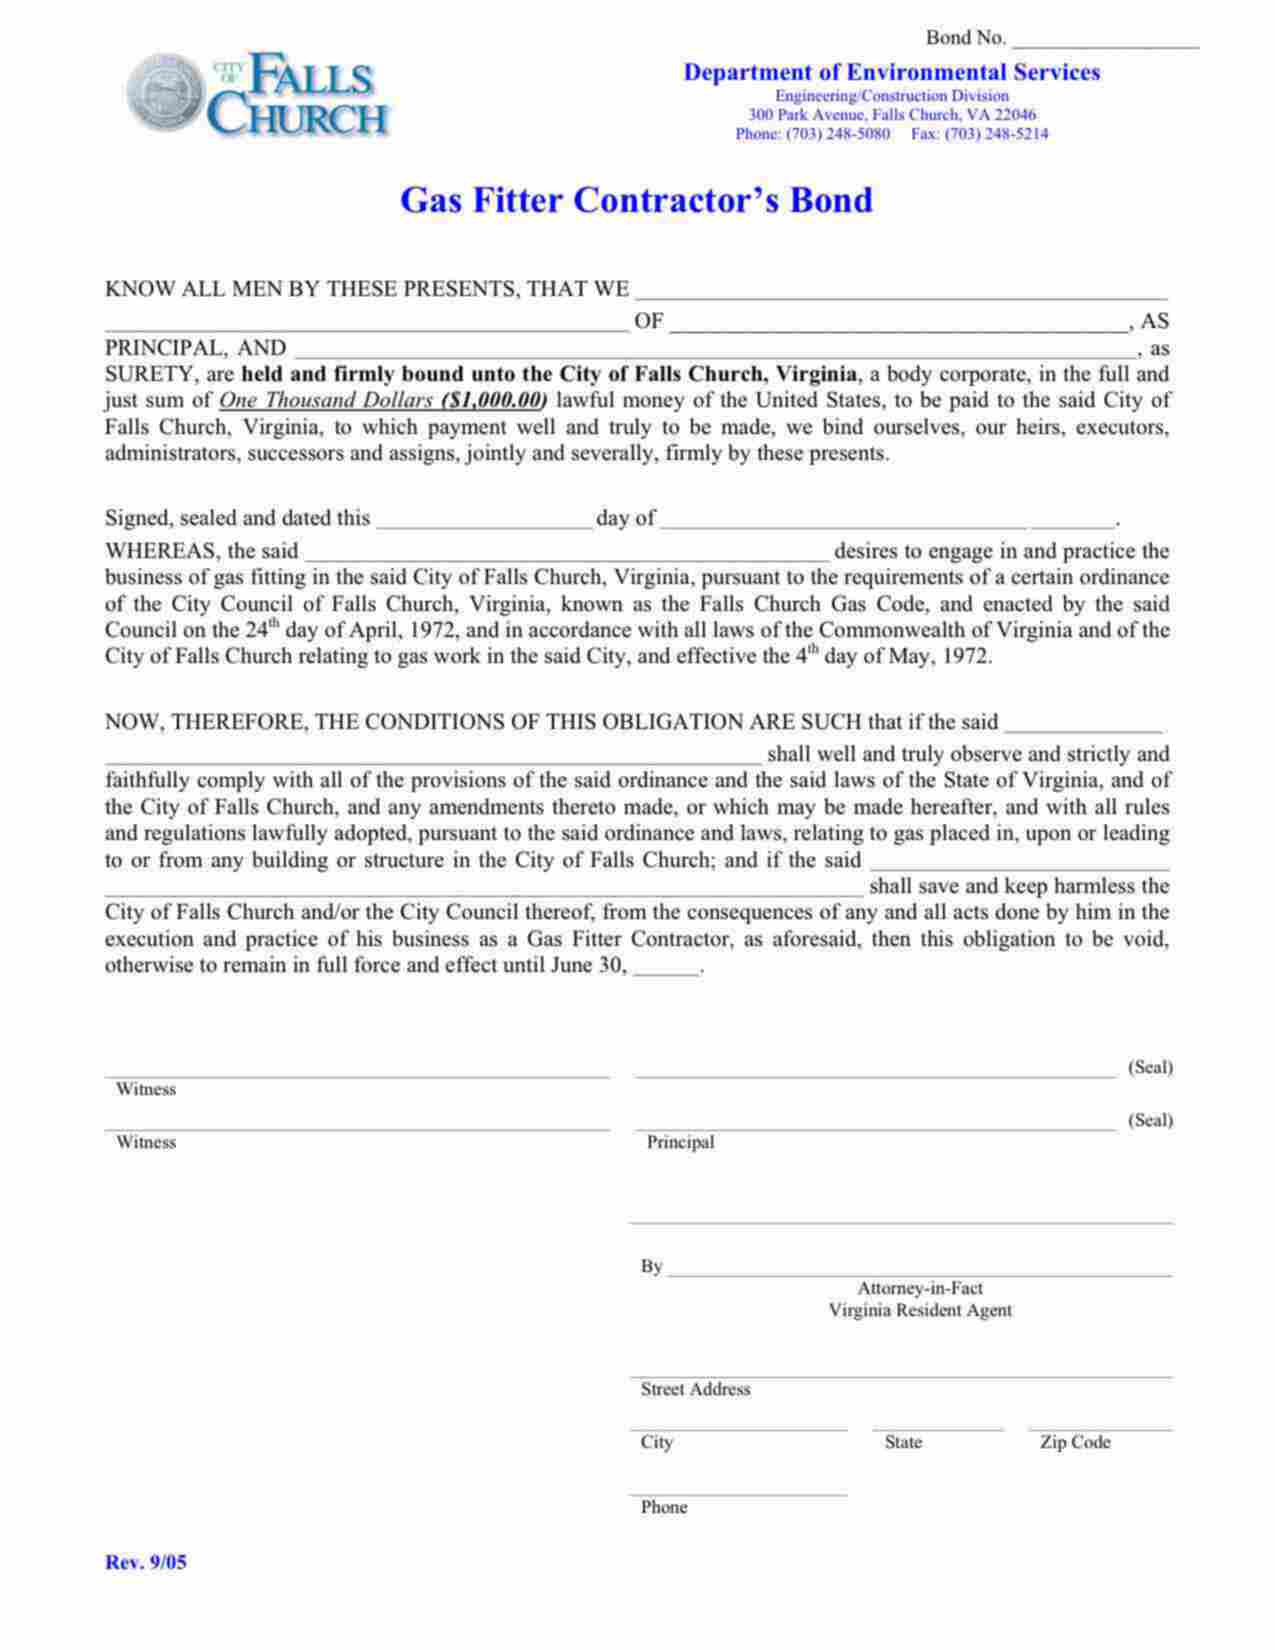 Virginia Gas Fitter Contractor Bond Form